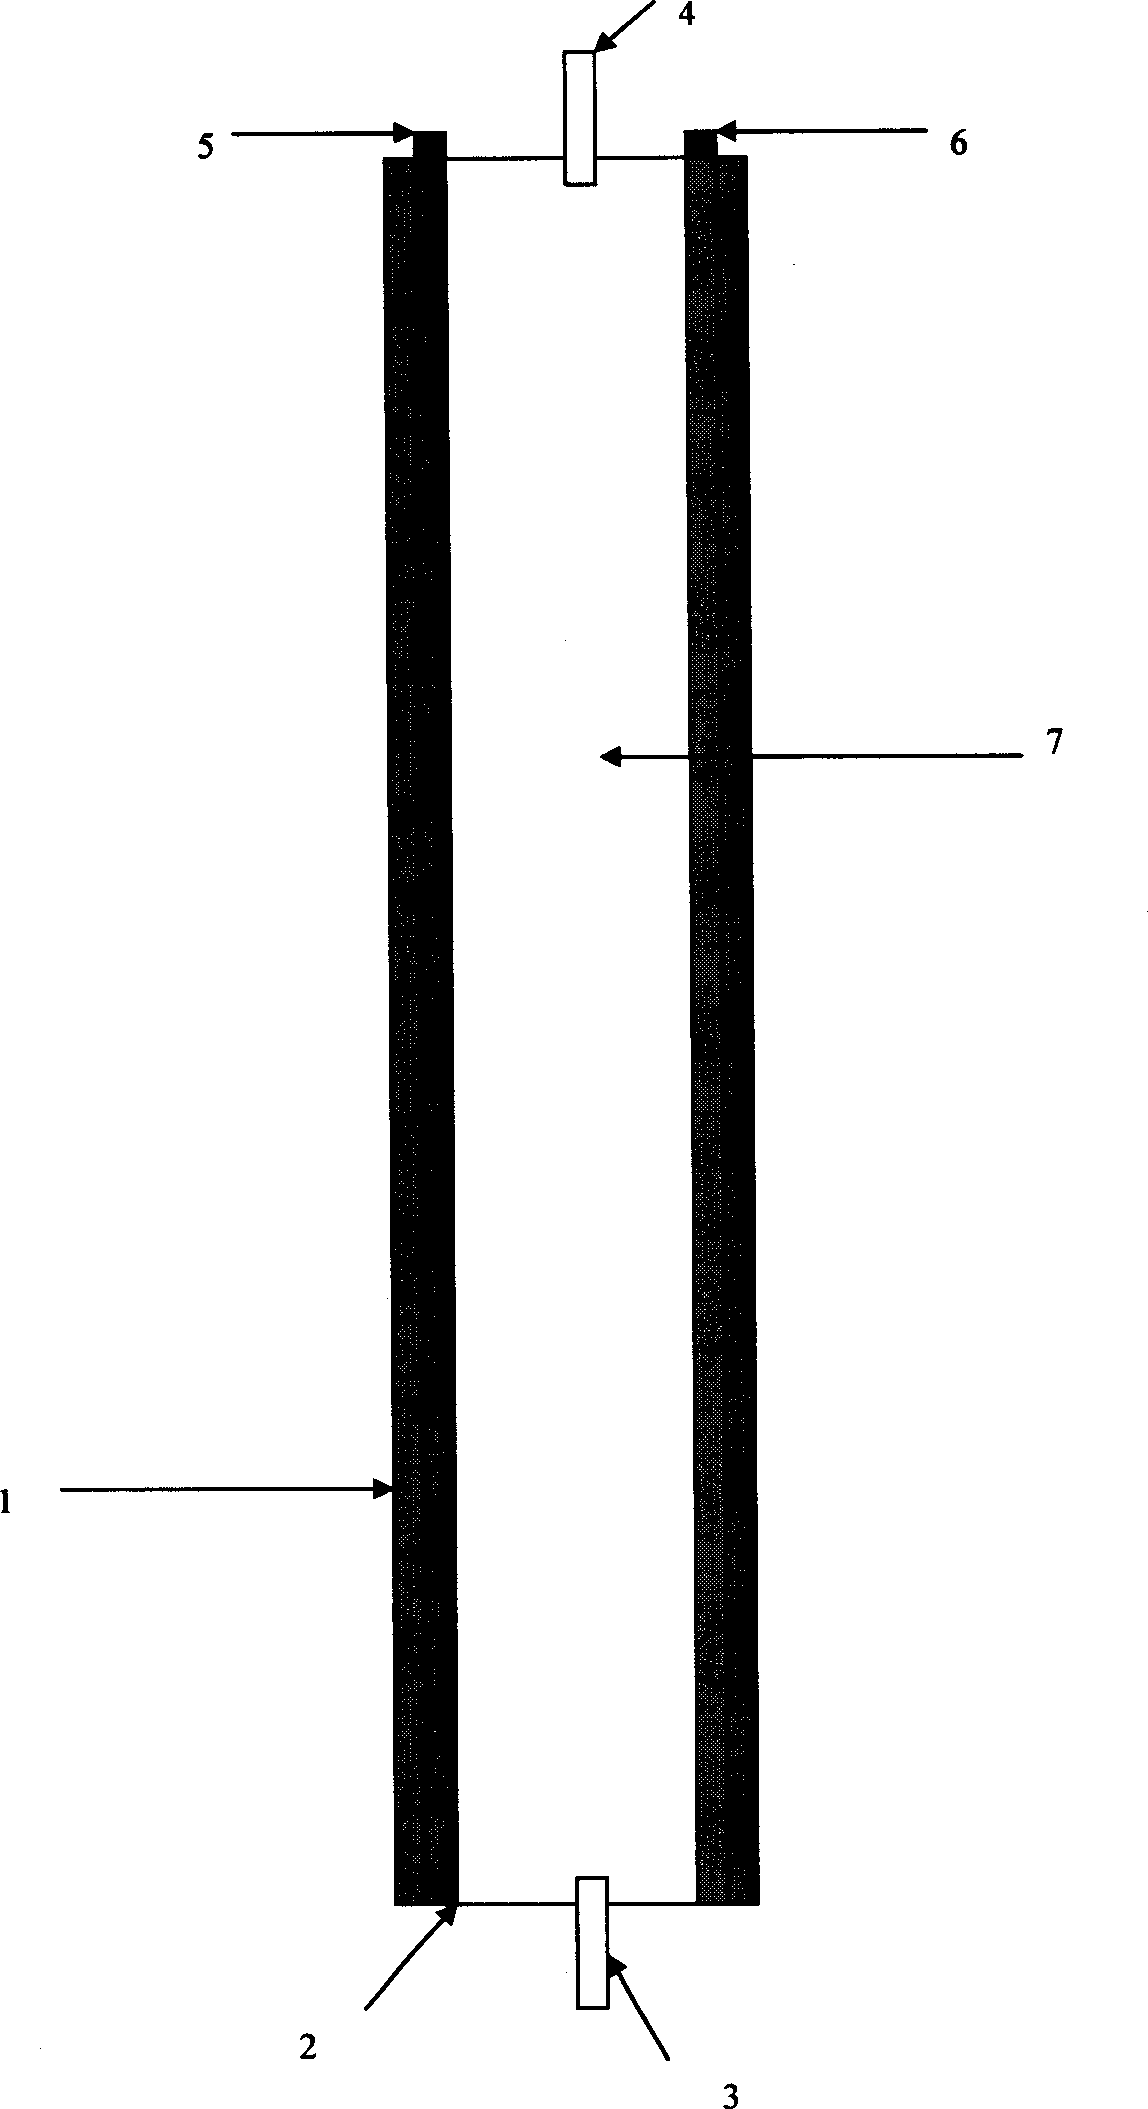 Oil smoke catalytic decomposition treating apparatus for range hoods